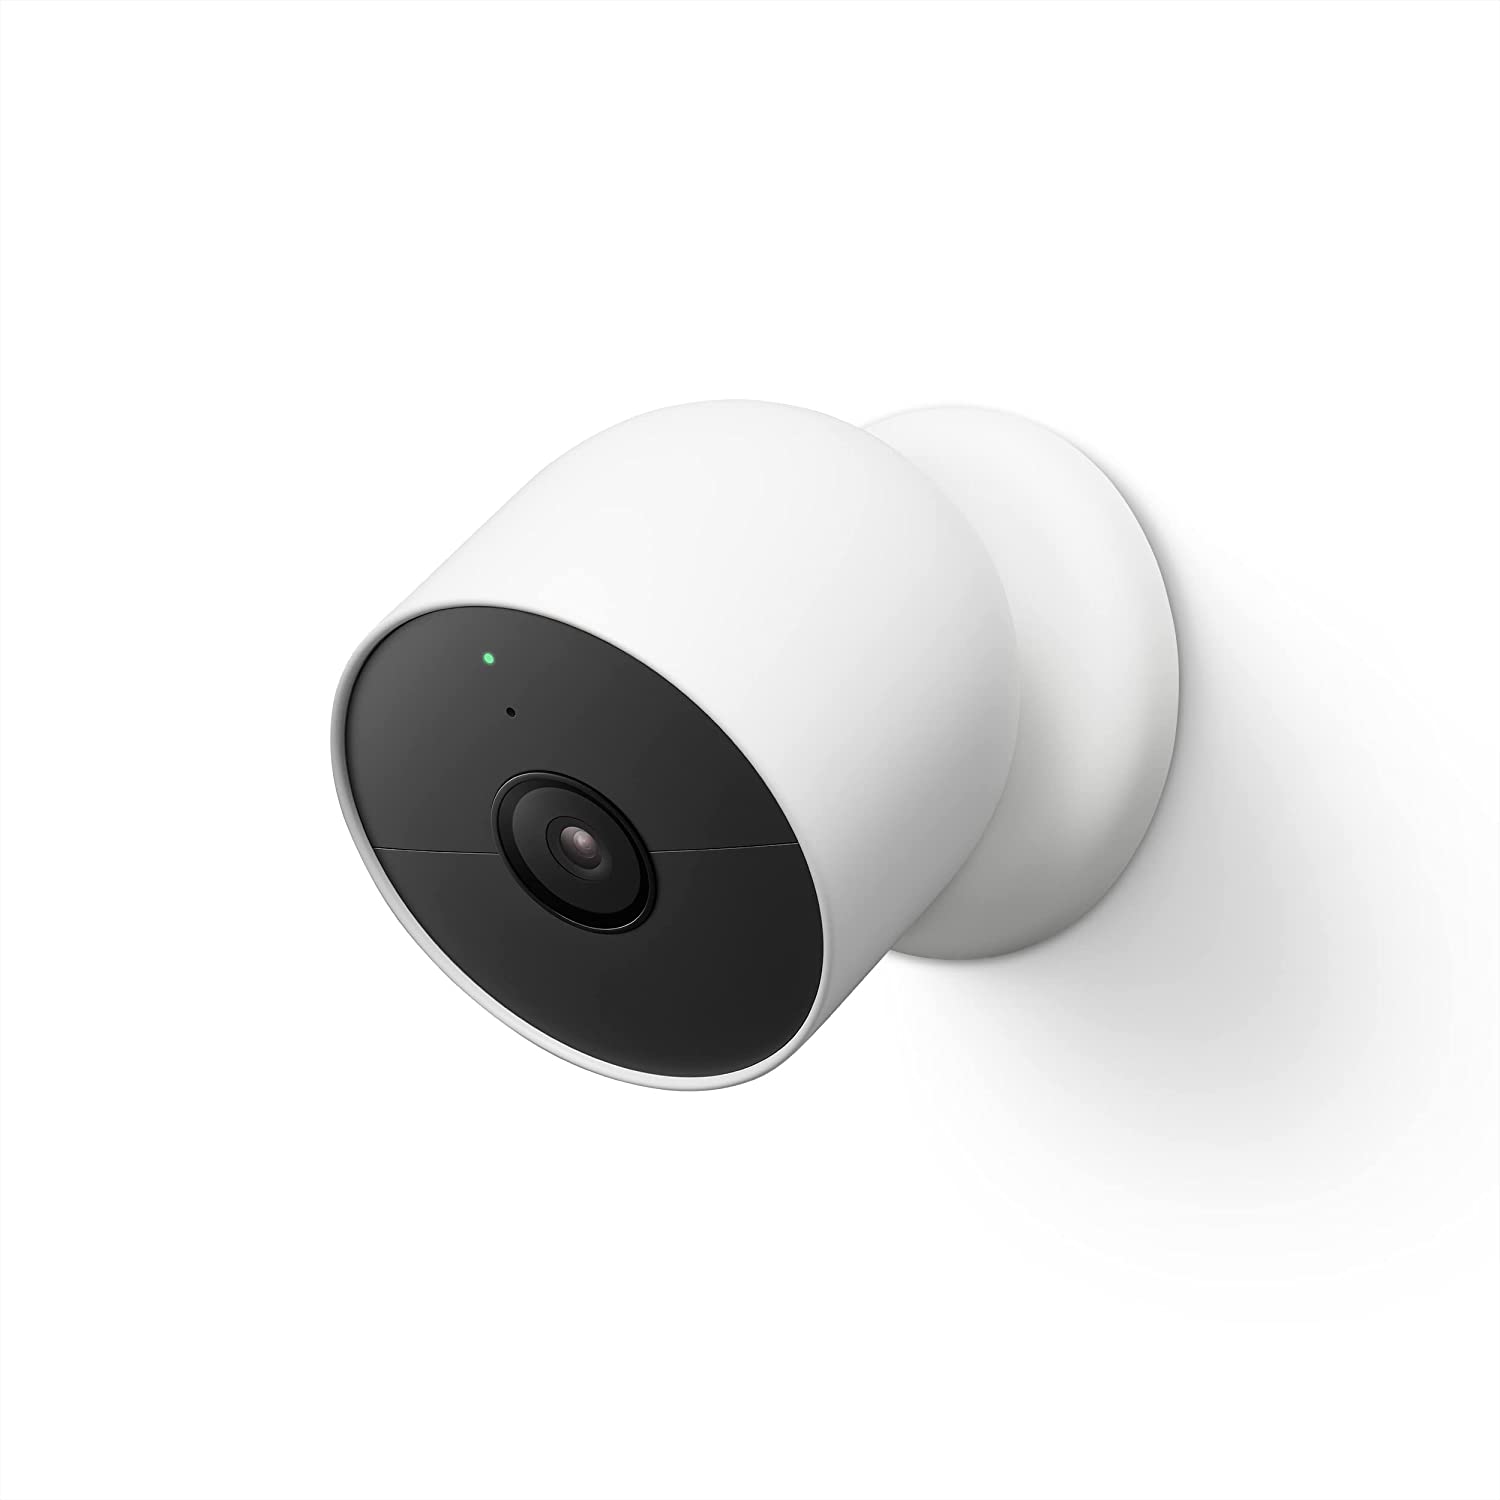 A photo of the Google Nest Cam Outdoor or Indoor home security camera